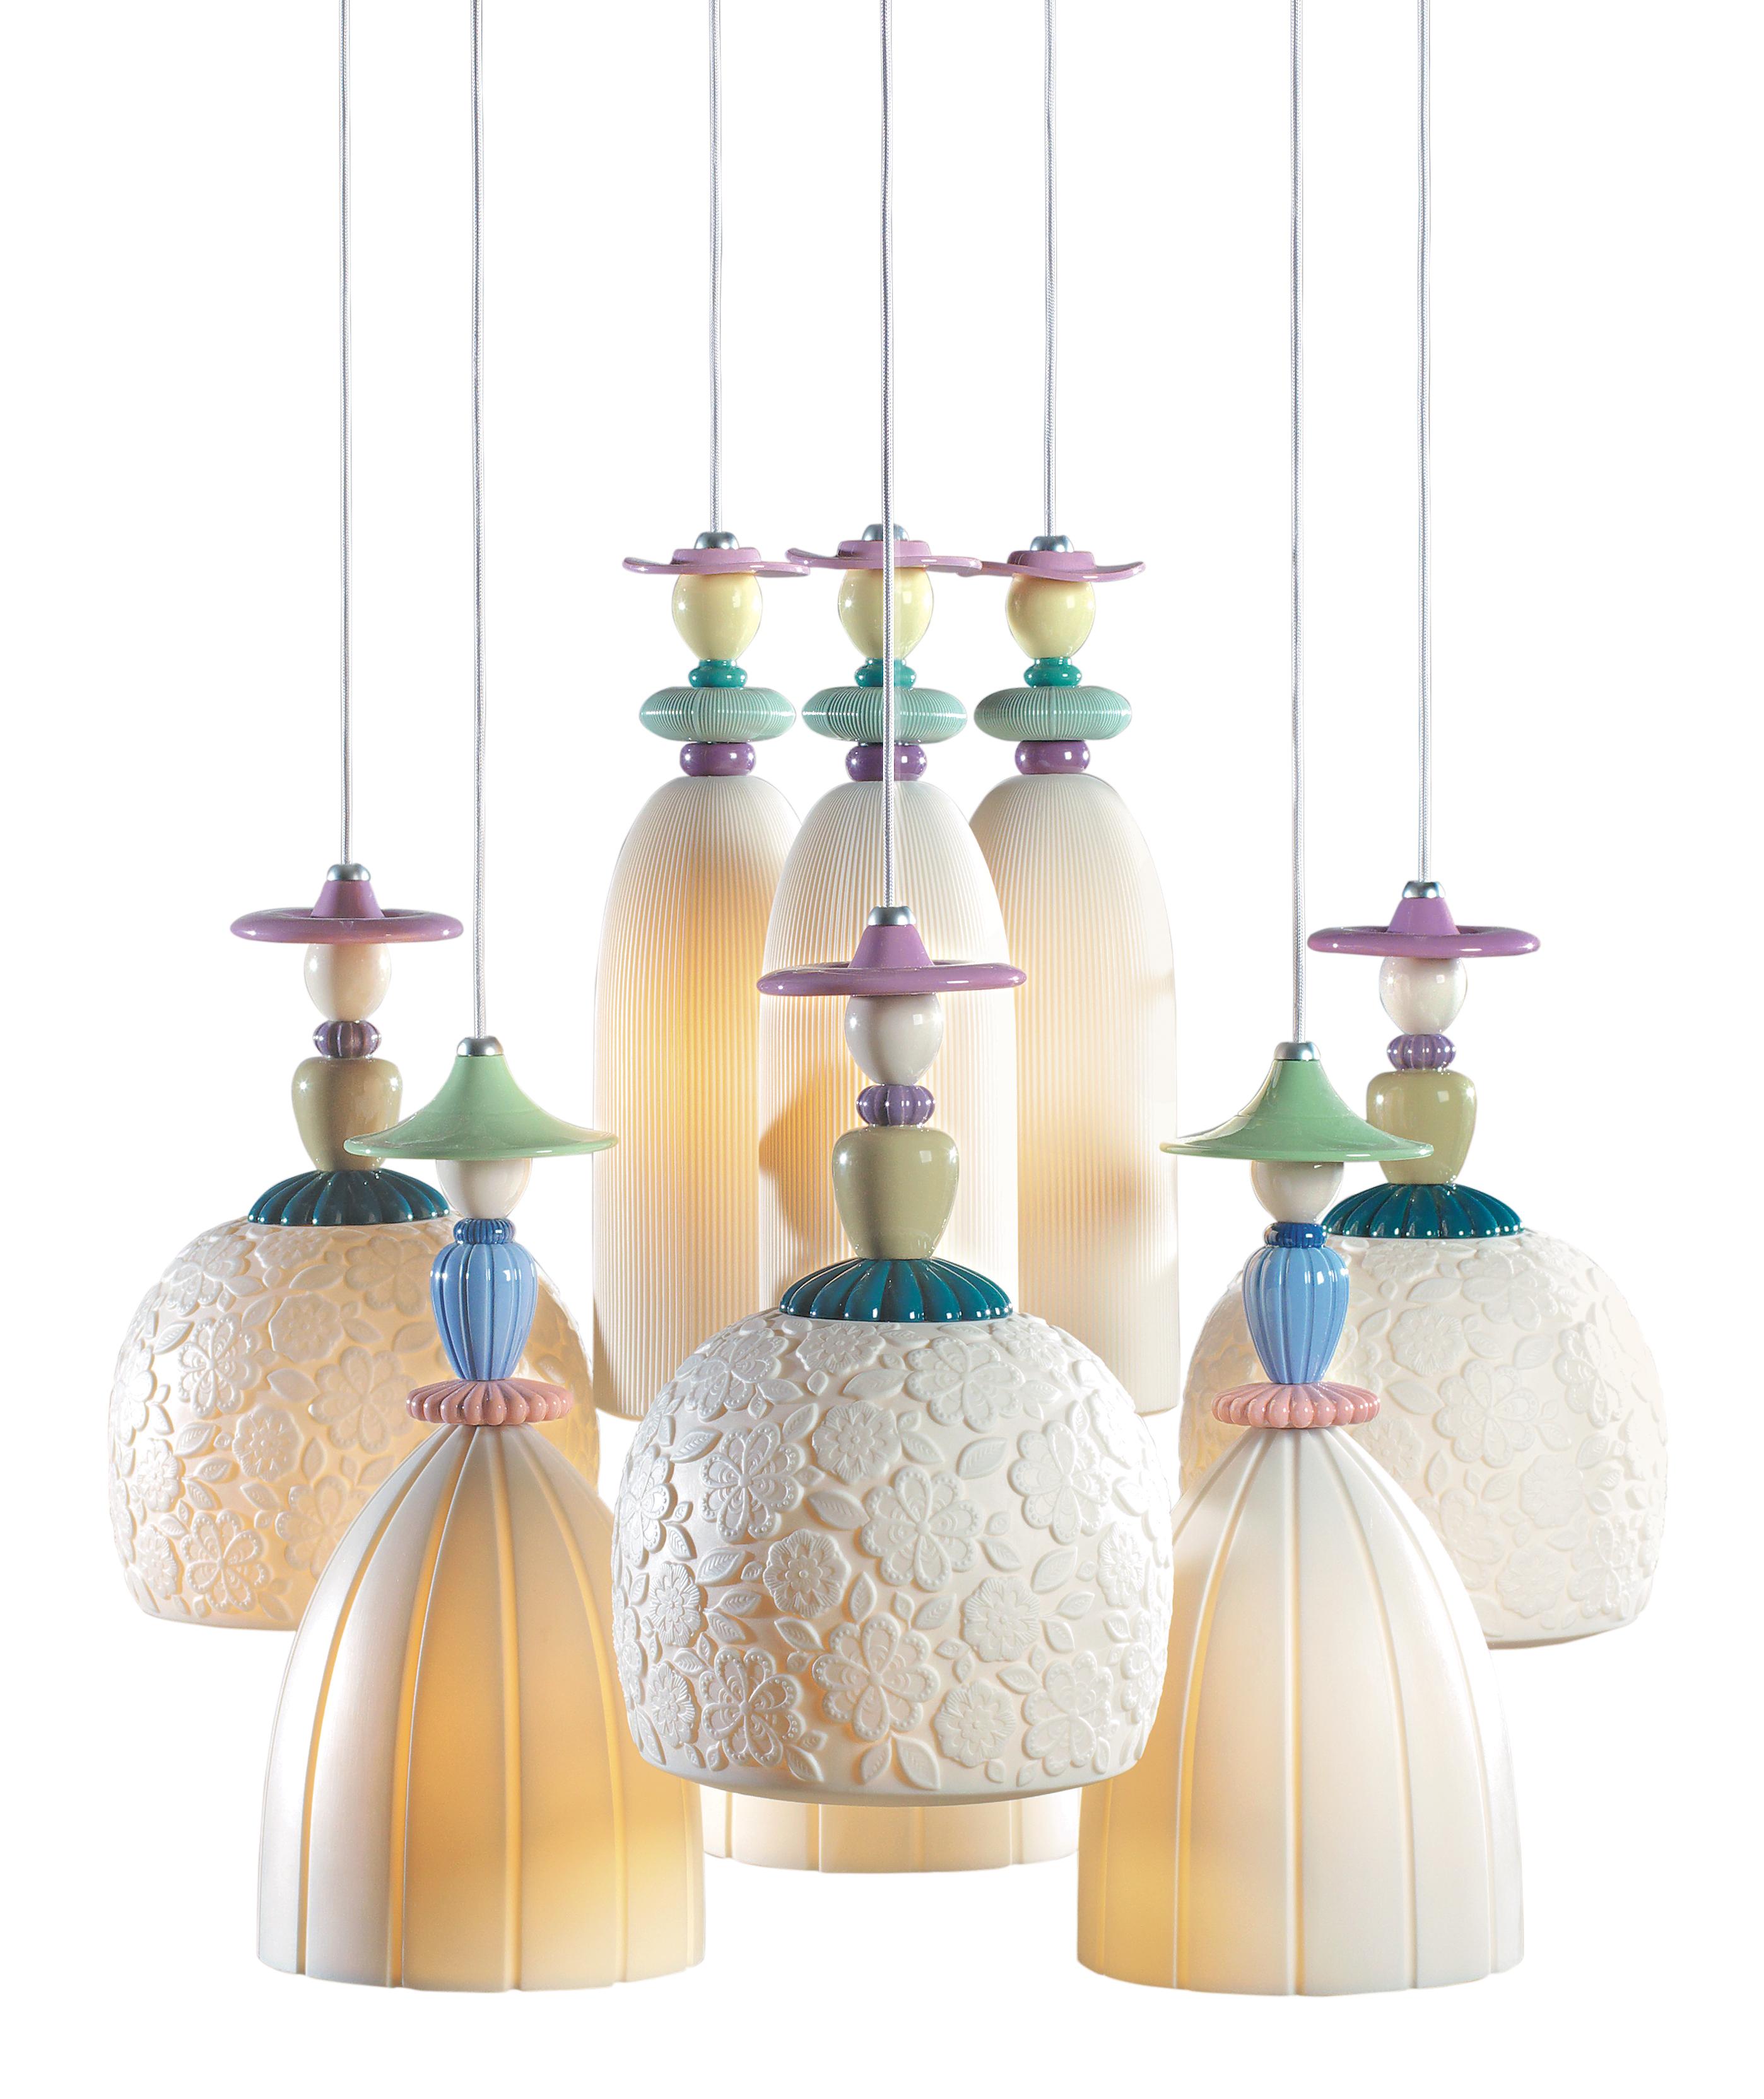 Handmade hanging ceiling lamp in brightly colored porcelain and floral decorations with nine engraved translucent white porcelain tulips. The Mademoiselle collection is inspired by Lladró's romantic ladies, one of his most traditional motifs, to